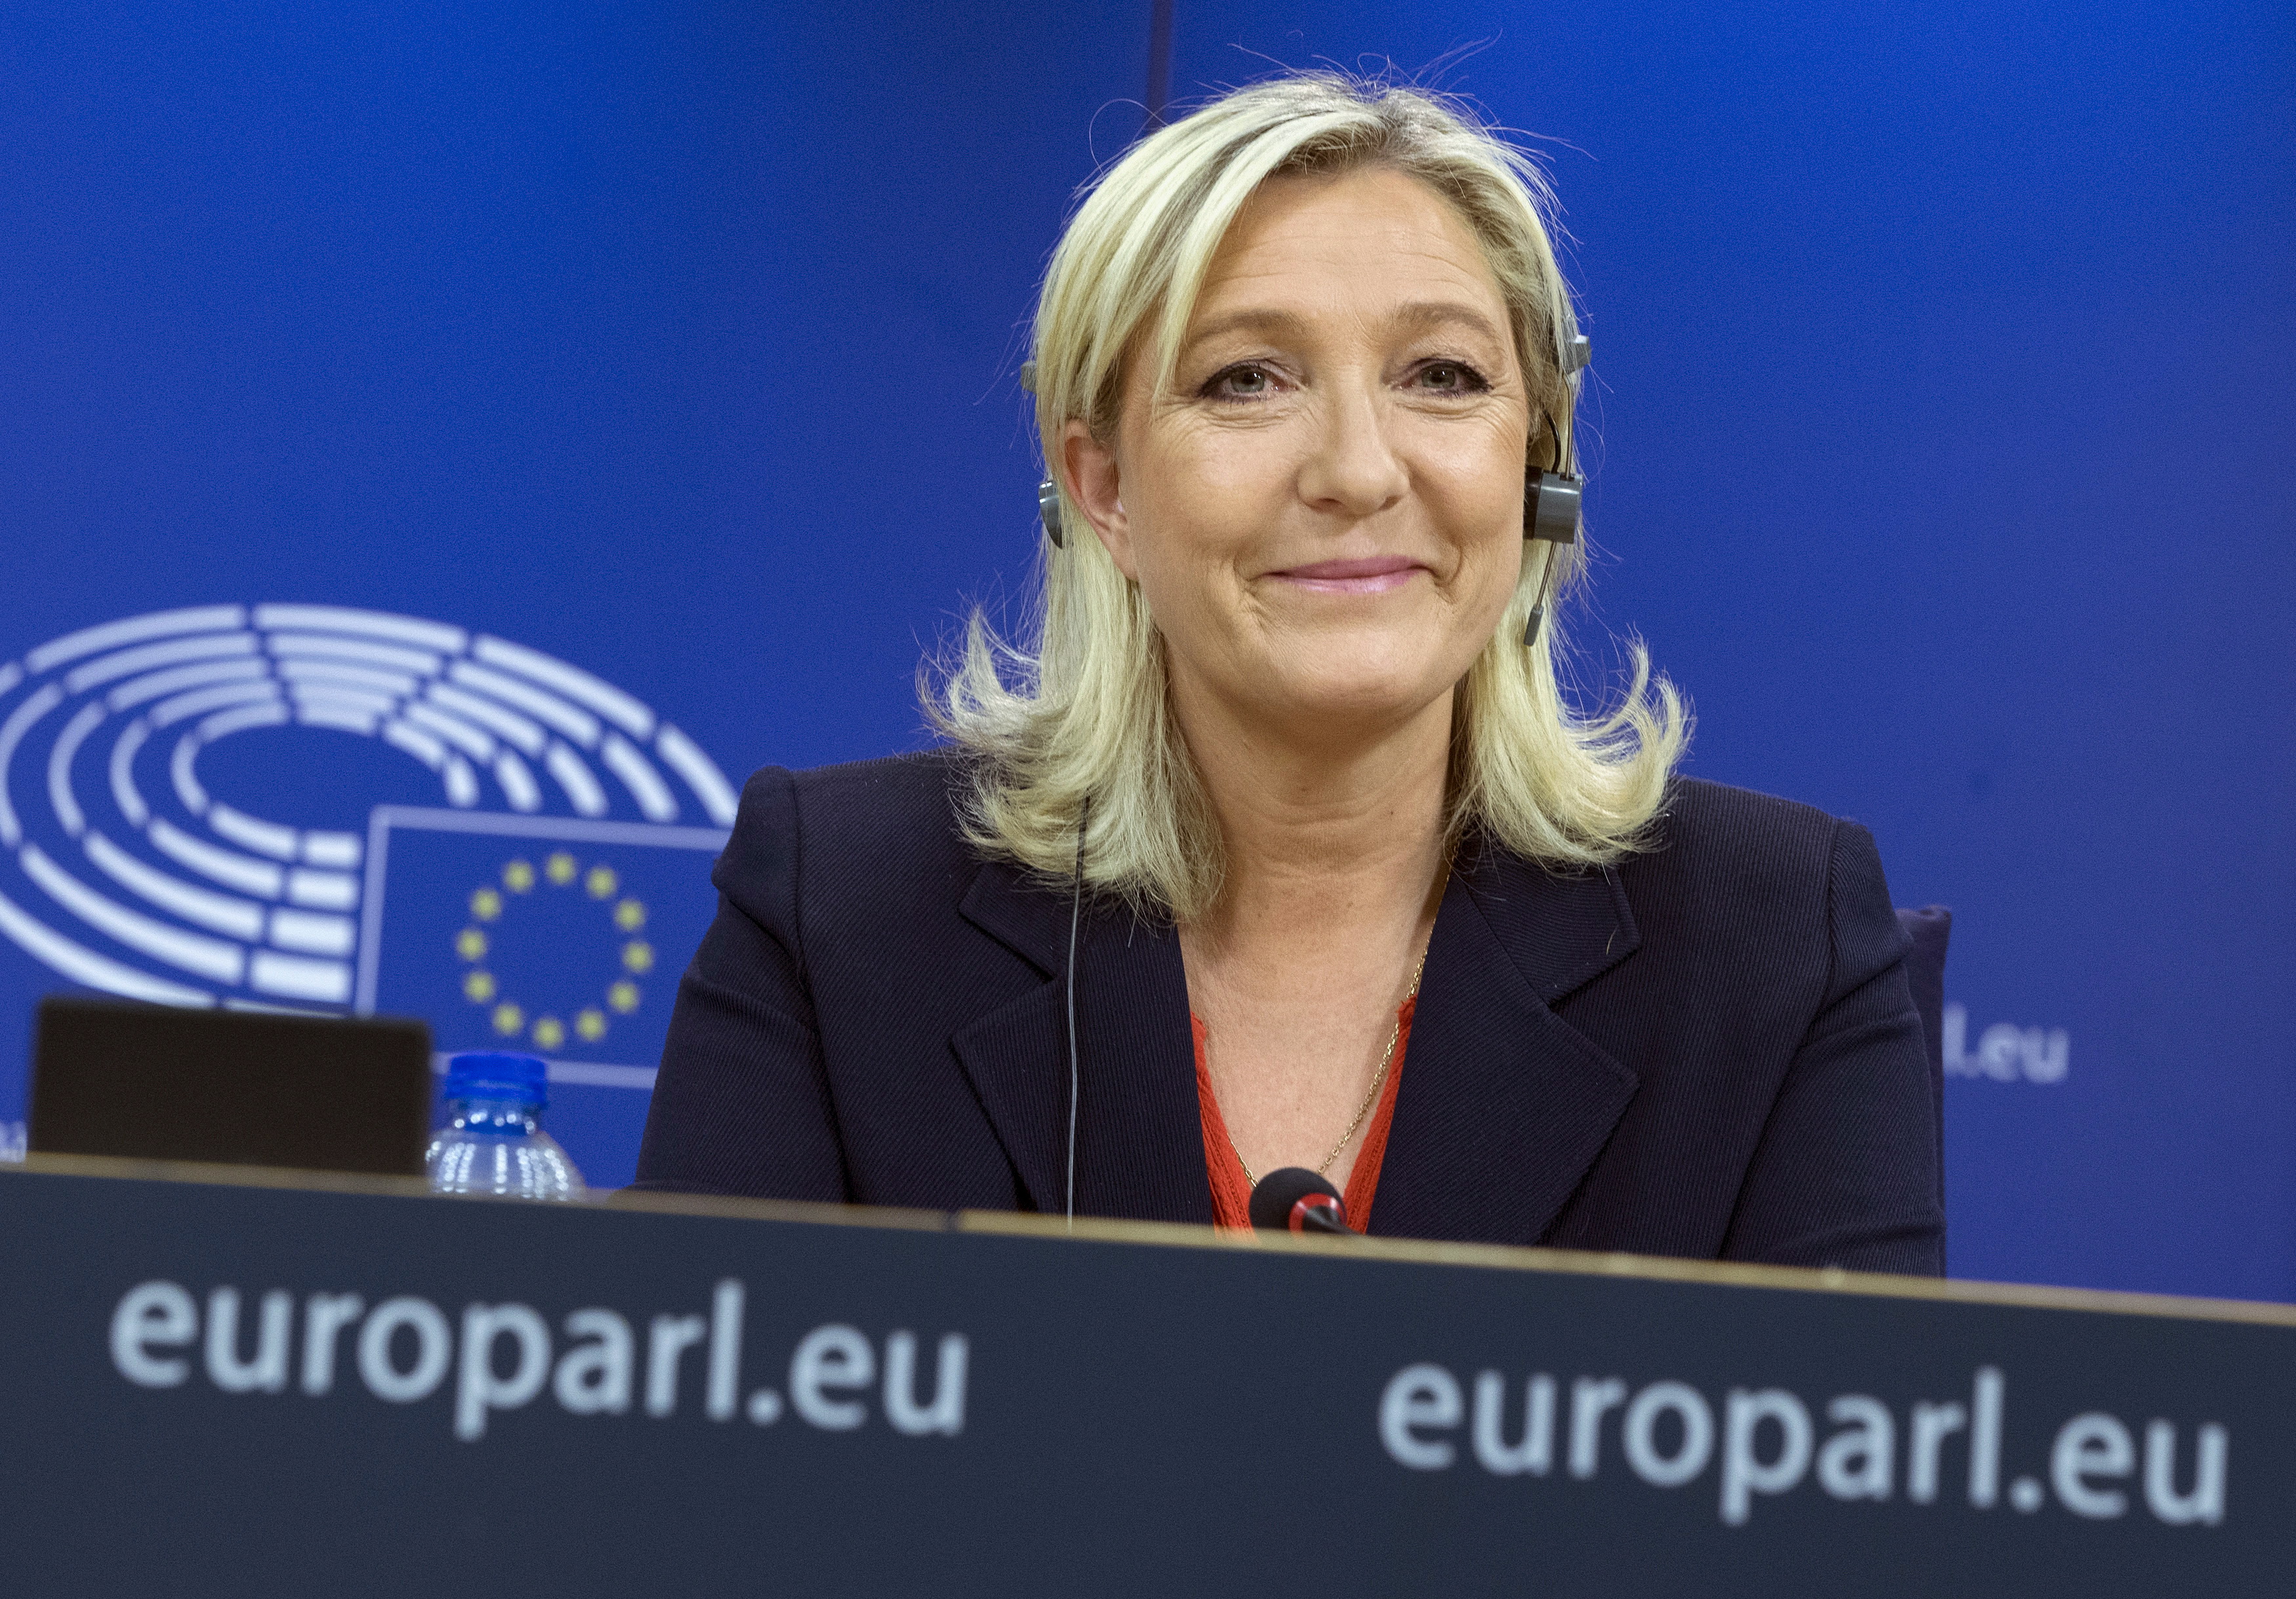 Le Pen, France's National Front political party head, attends a joint news conference at the European Parliament in Brussels